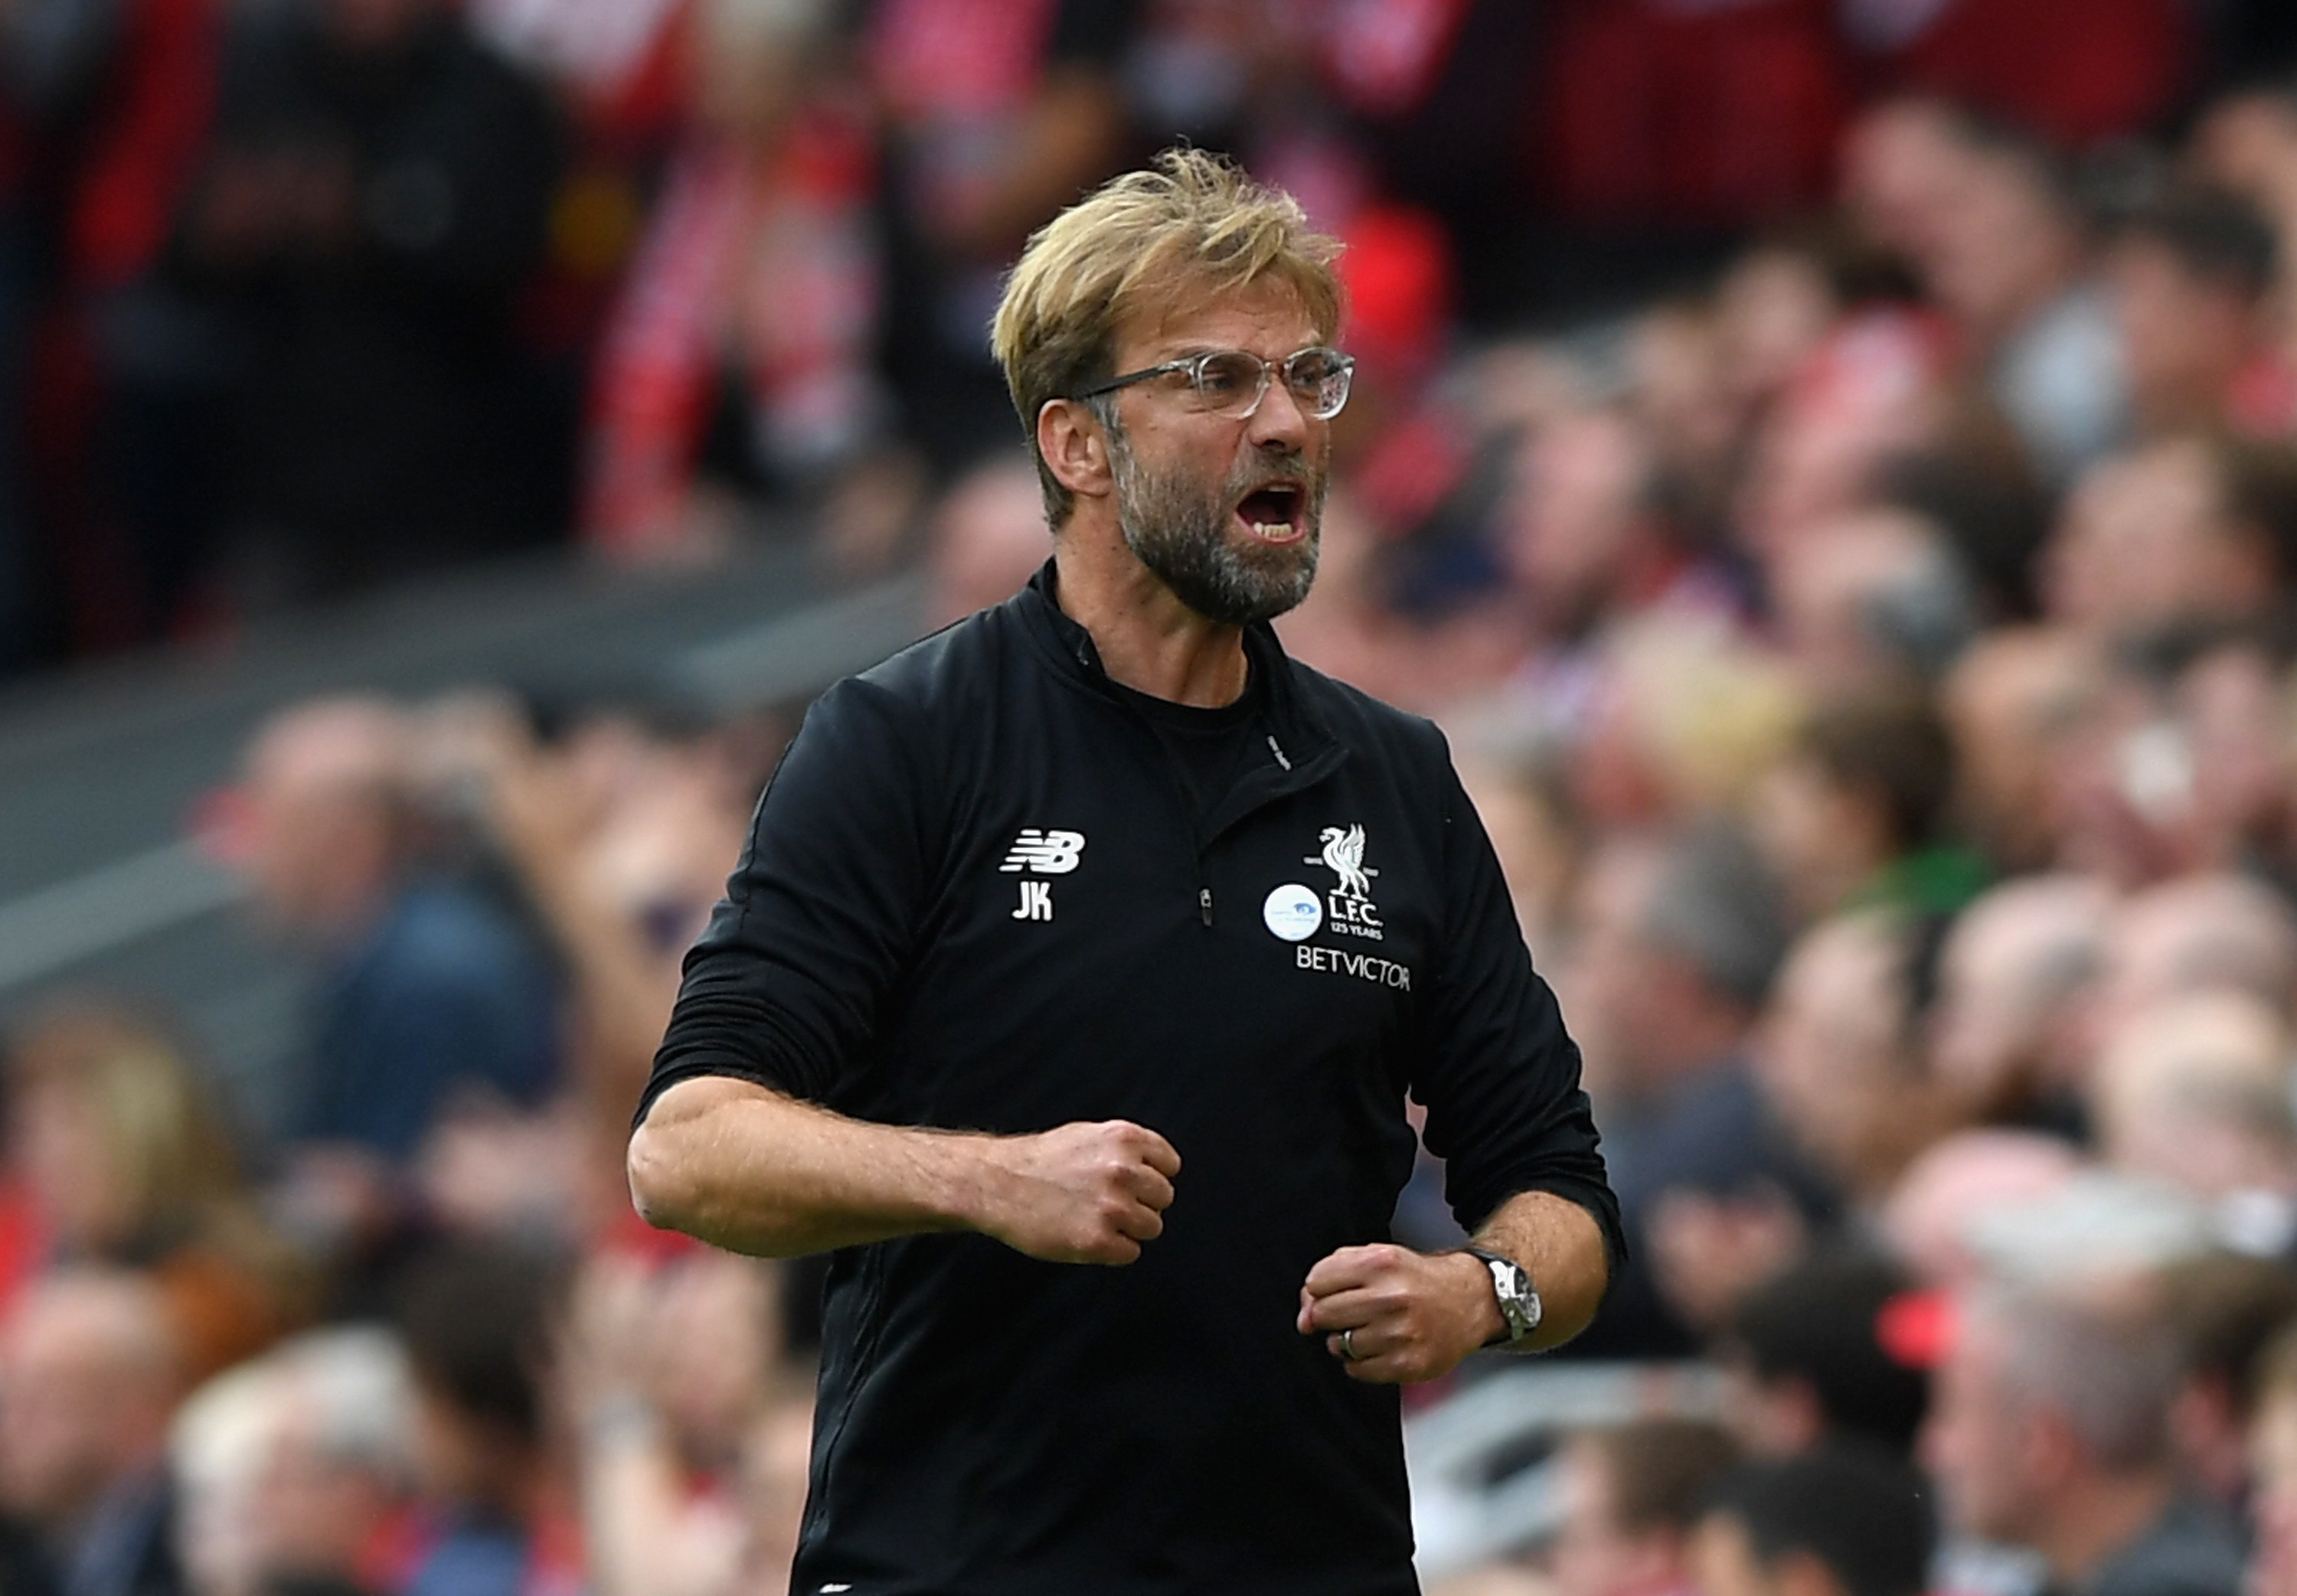 Jurgen Klopp, Manager of Liverpool reacts during the Premier League match between Liverpool and Manchester United at Anfield on October 14, 2017 in Liverpool, England. (Shaun Botterill/Getty Images)